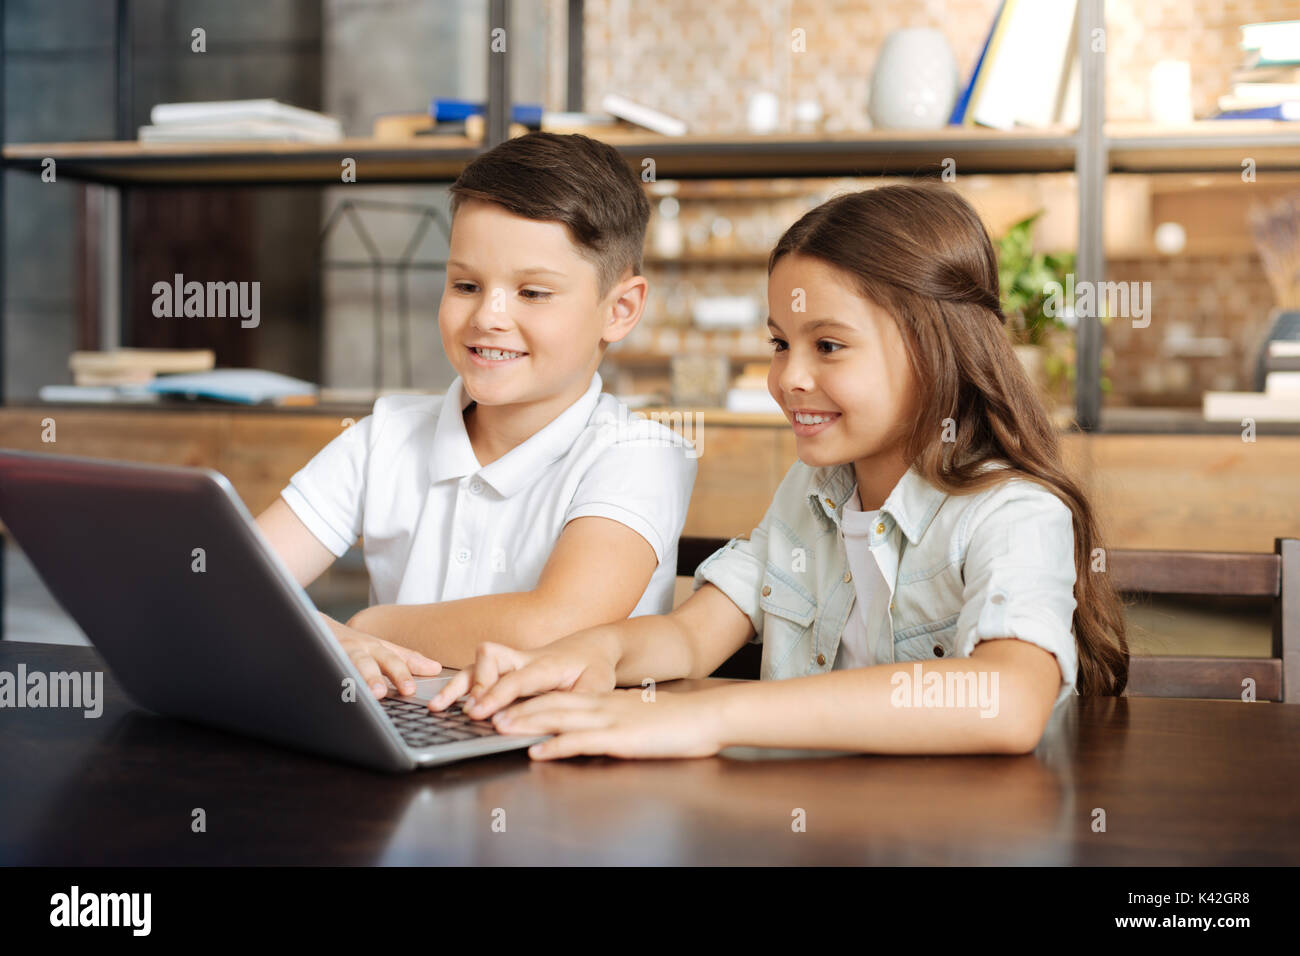 Little brother and sister surfing the web together Stock Photo